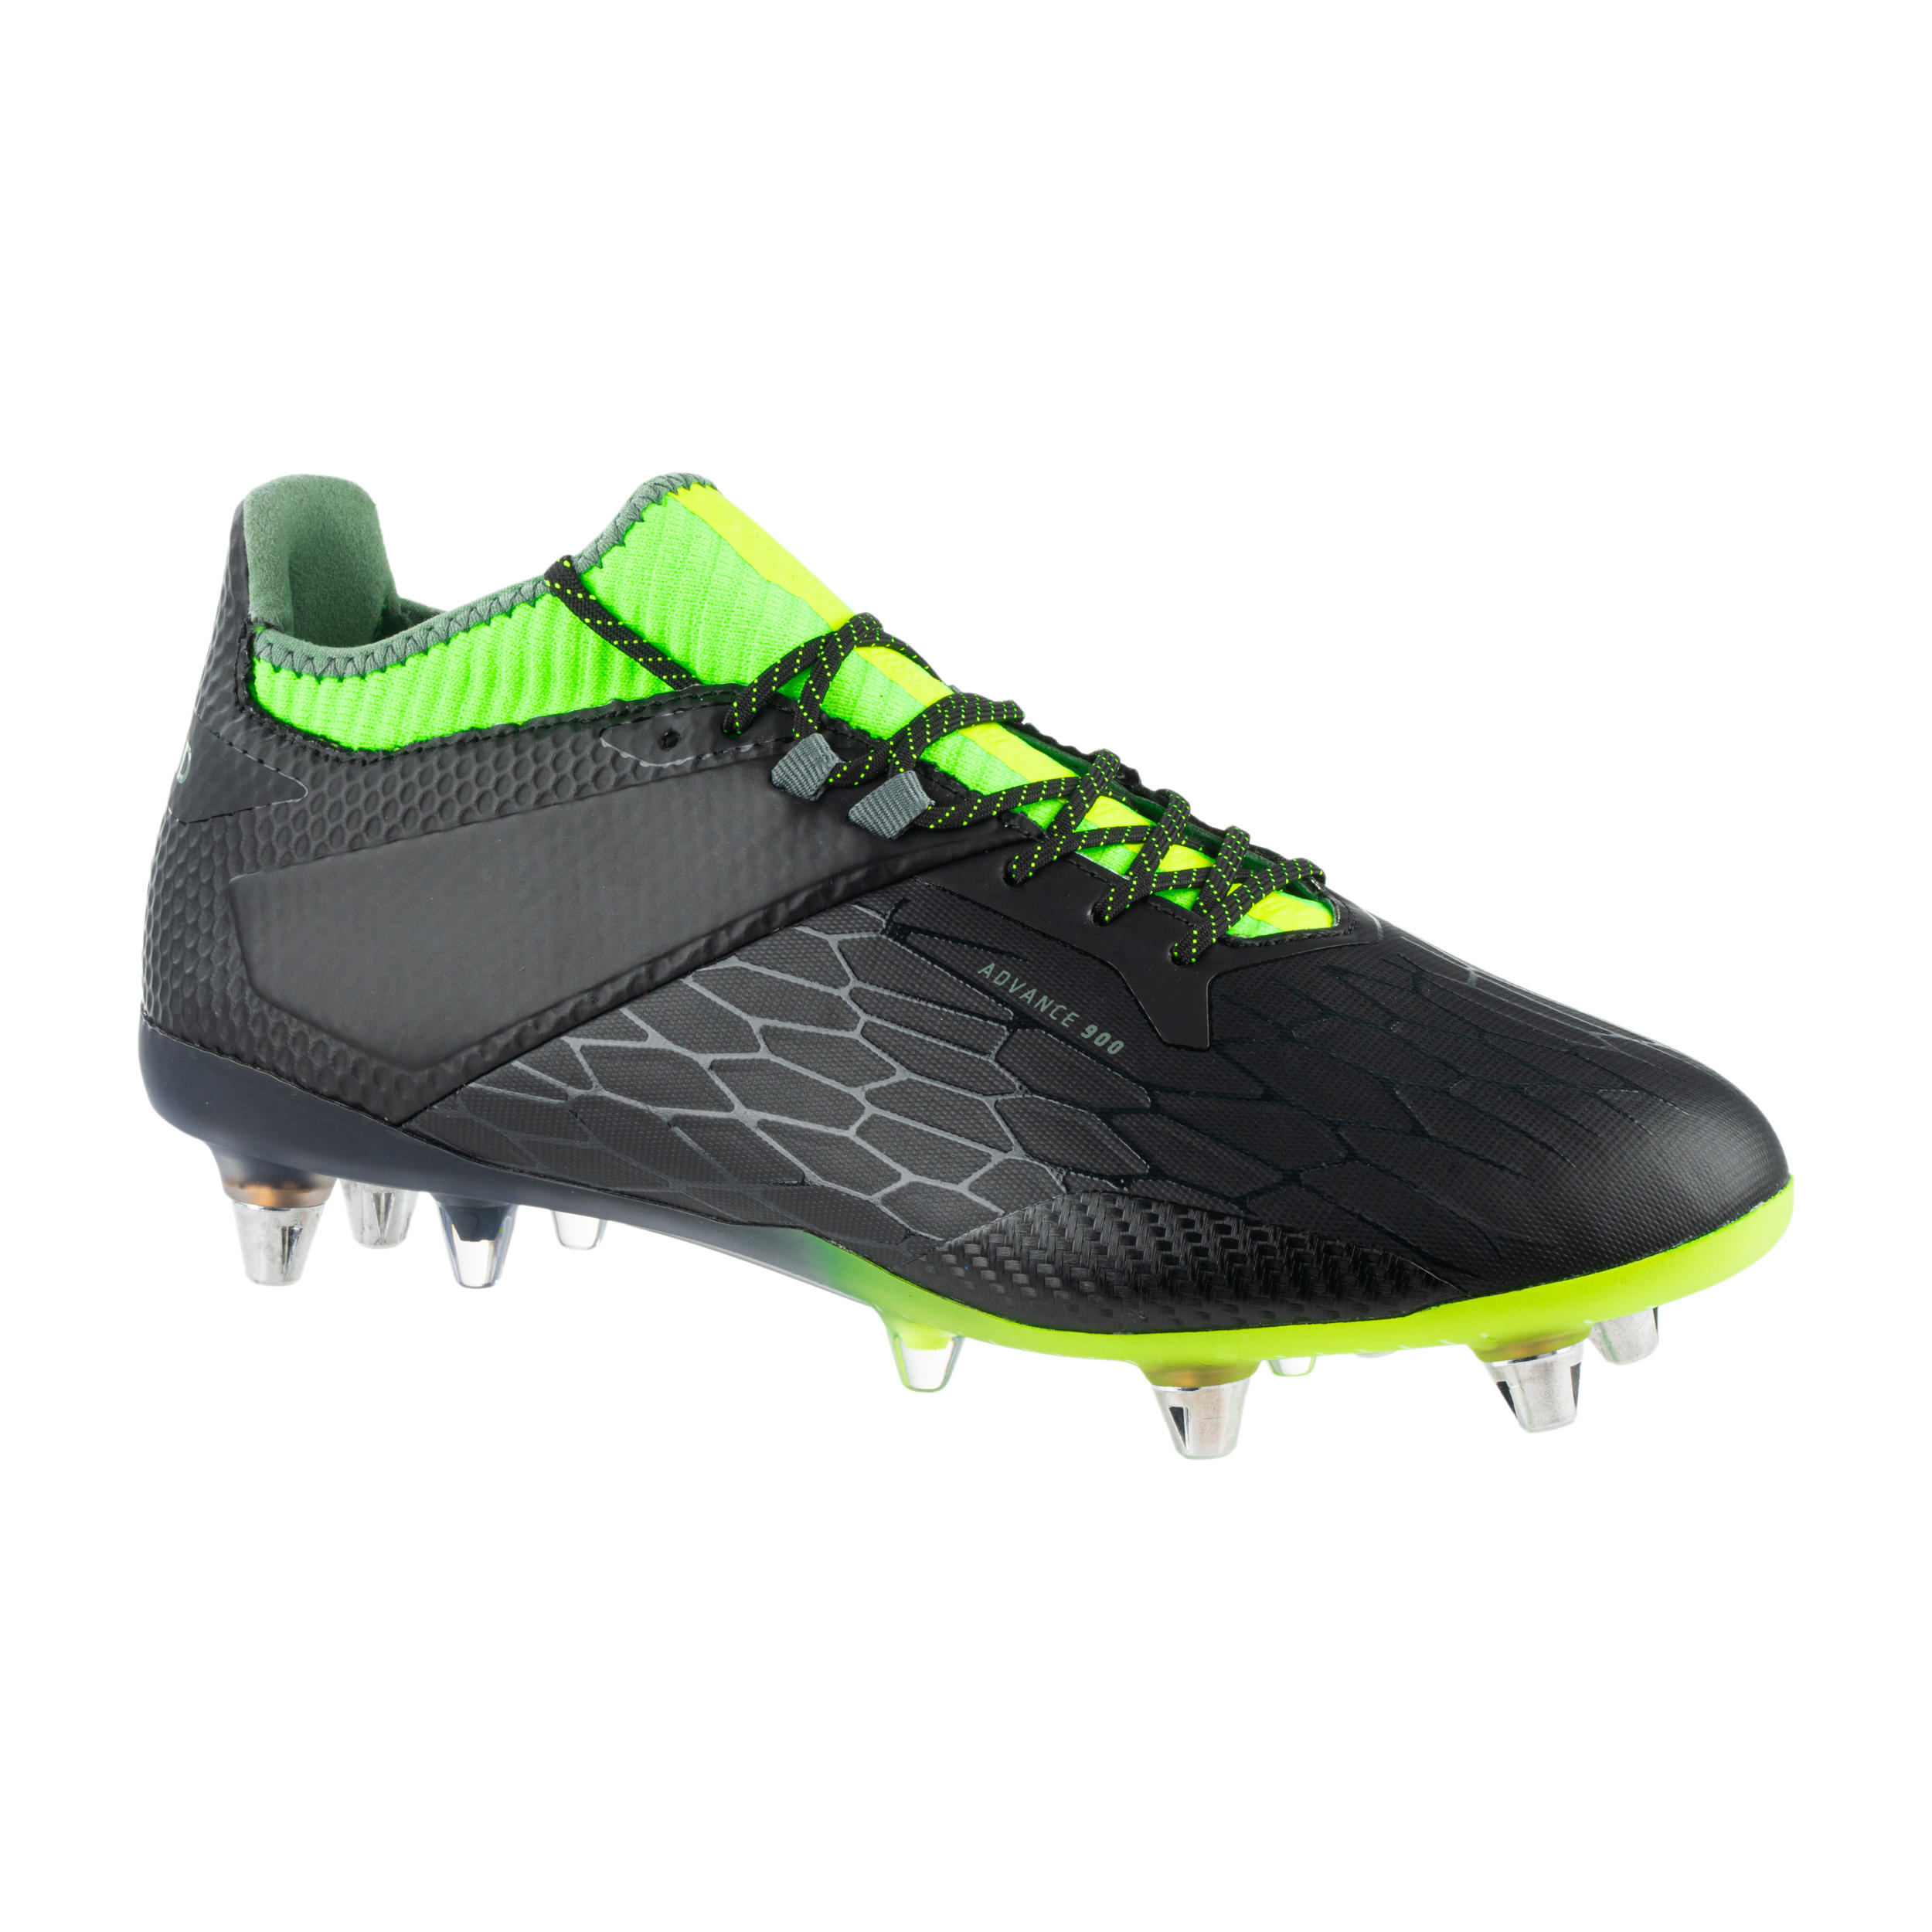 Adult Screw-In Hybrid Rugby Boots Advance R900 SG - Black/Yellow 1/14